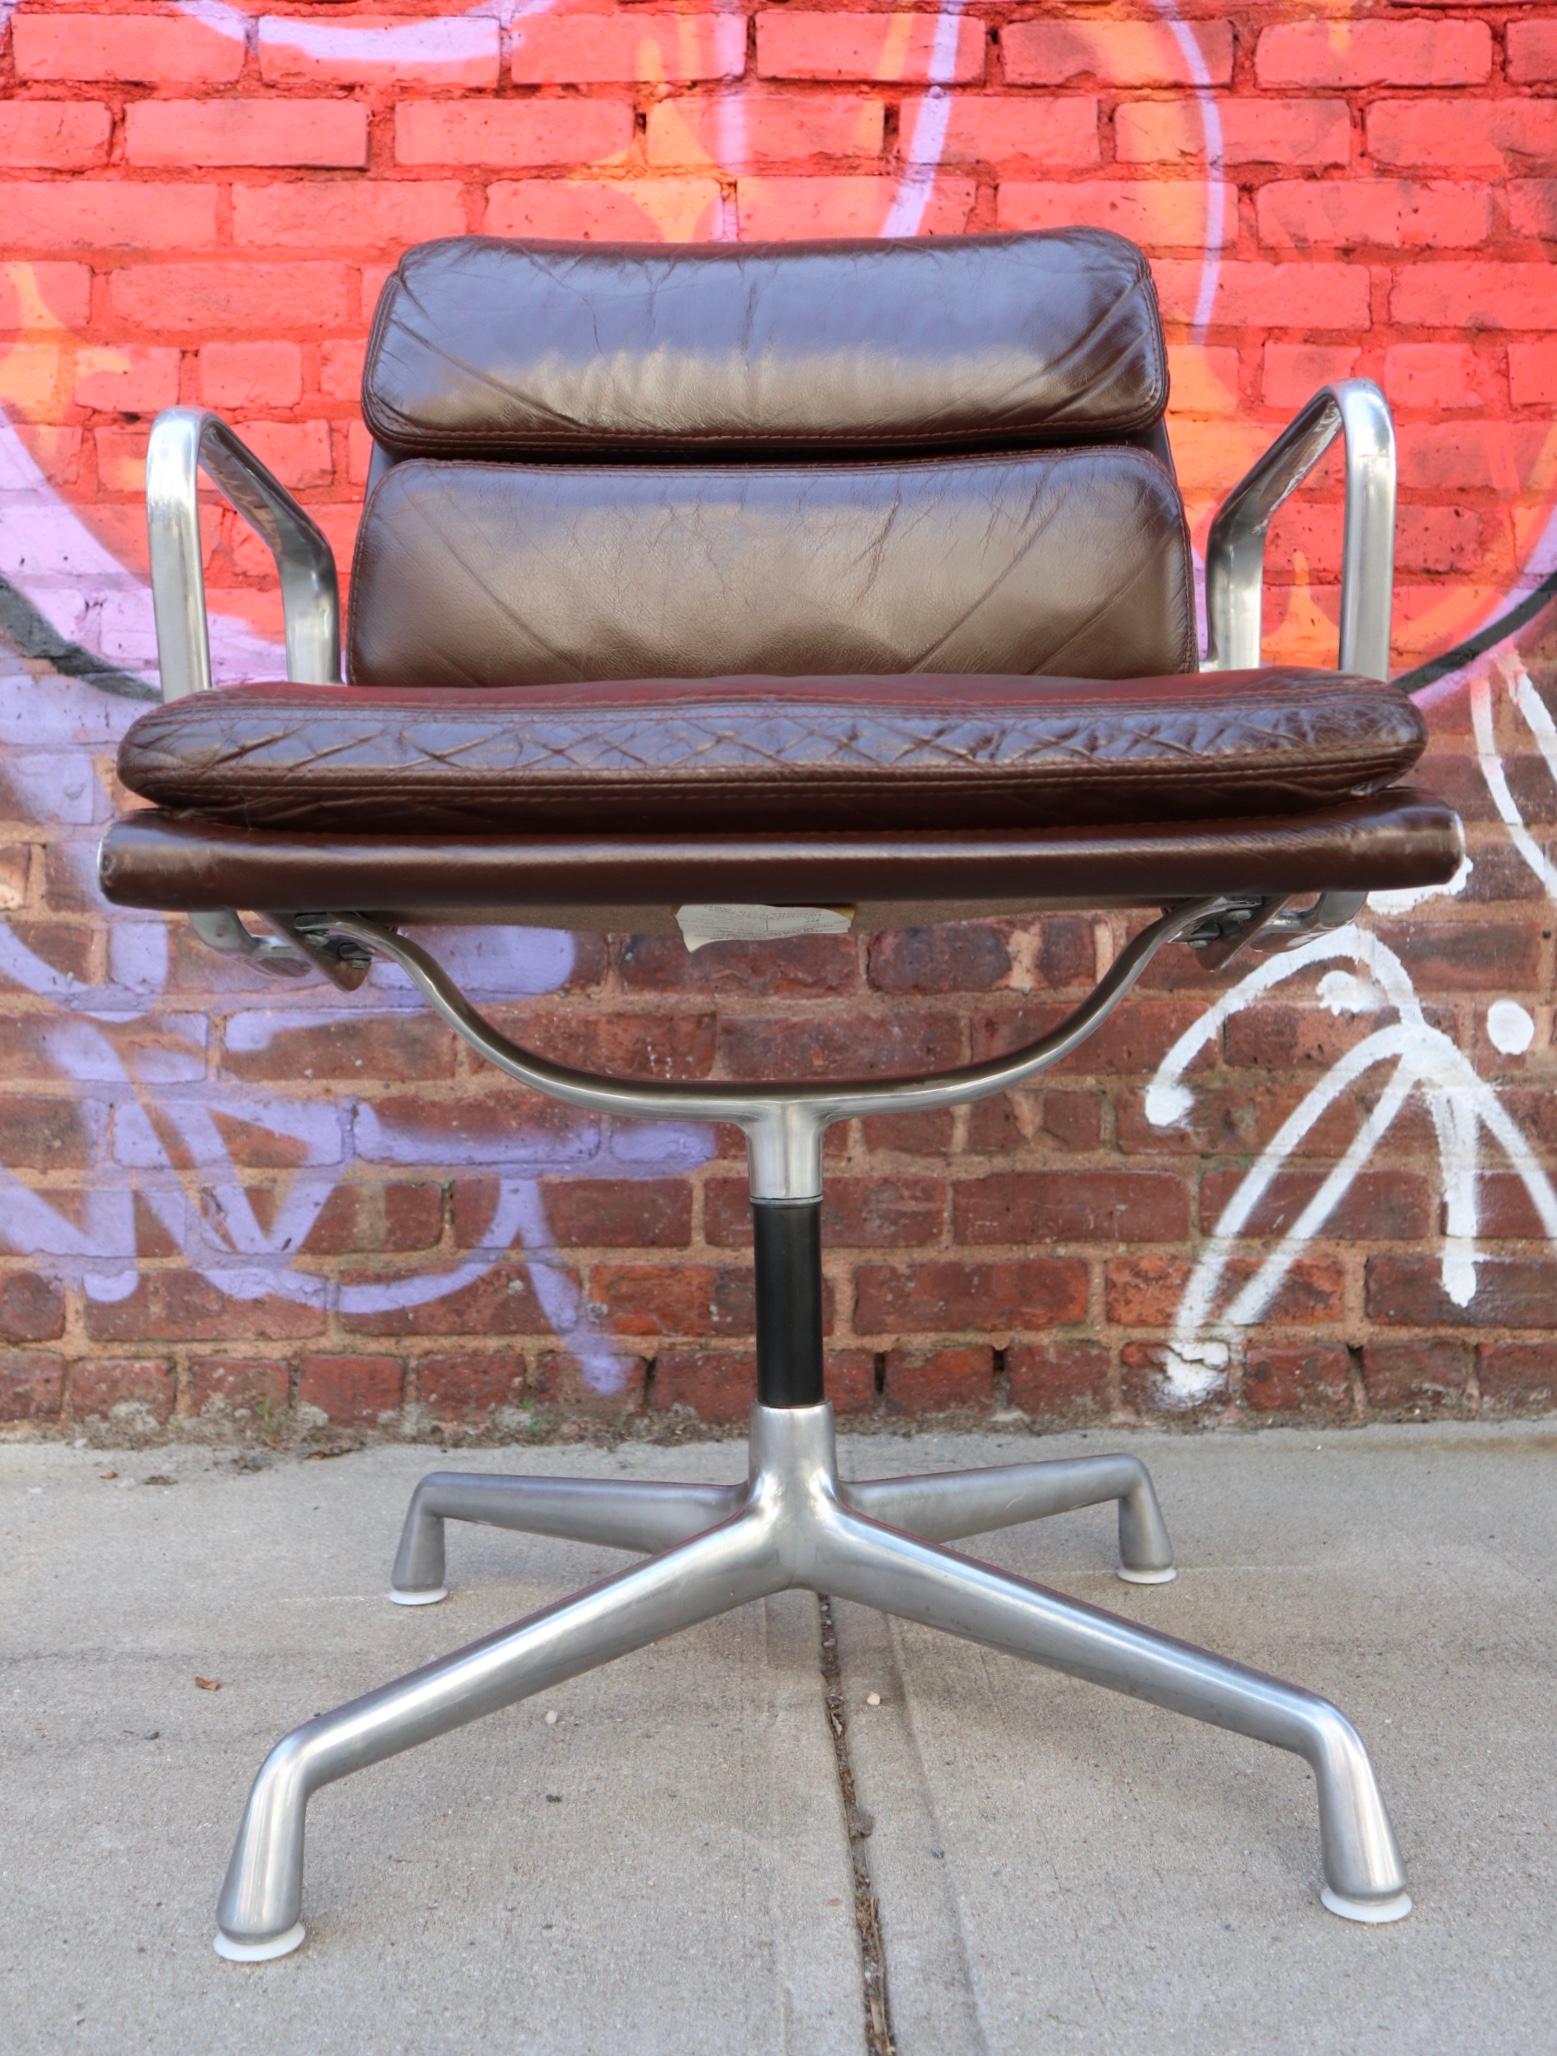 Gorgeous Classic Herman Miller soft pad management office chair. Outfitted in supple brown leather and polished aluminum, France. Chair swipes smoothly. Signed with label and embossed Herman Miller in frame.